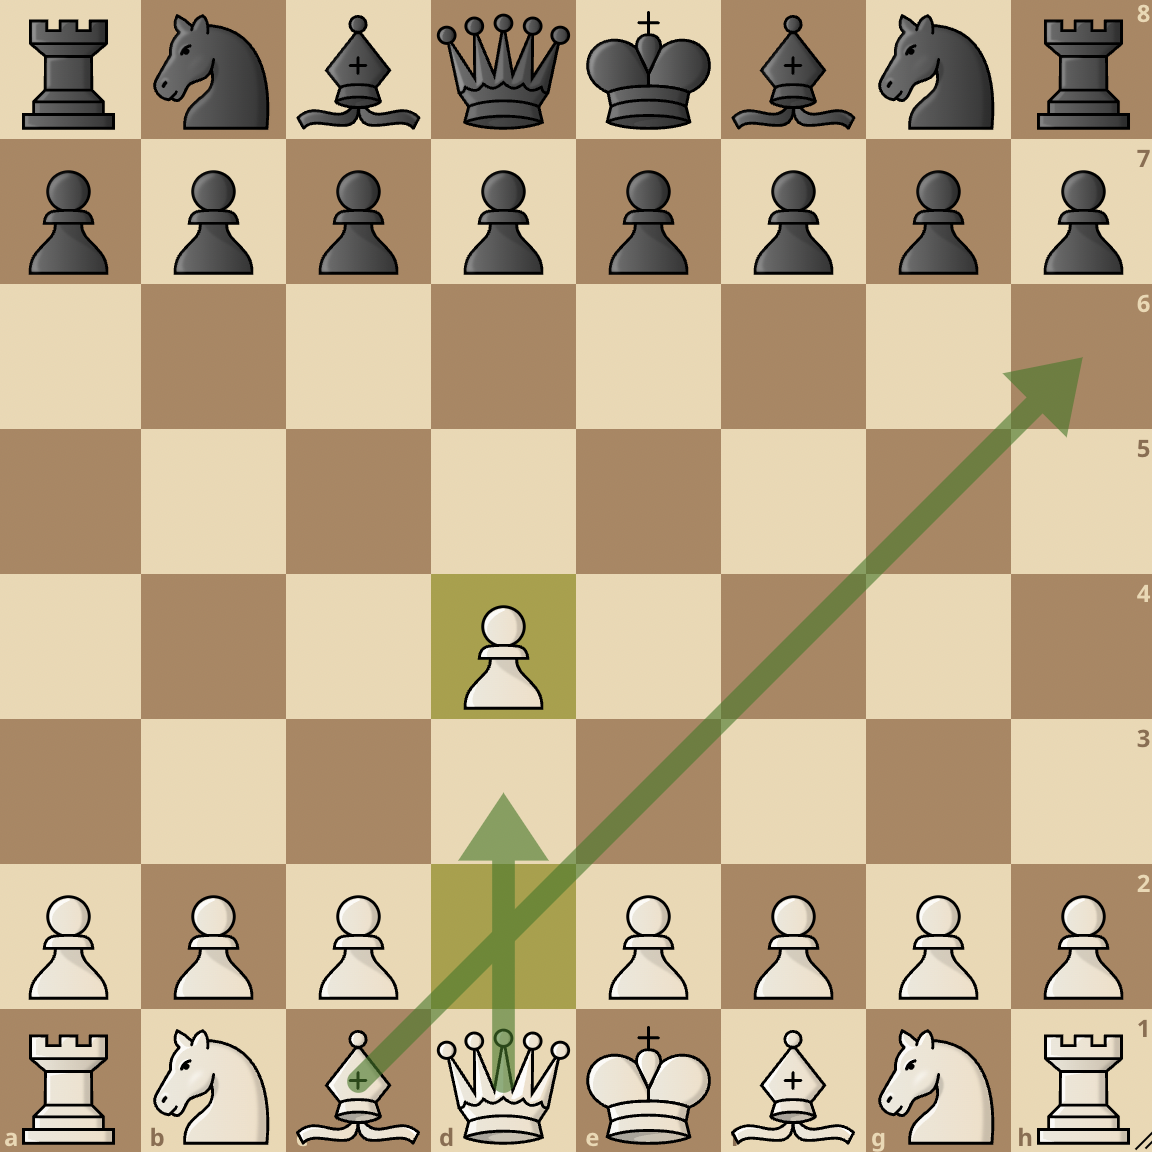 1. d4 – Queen's Pawn Opening